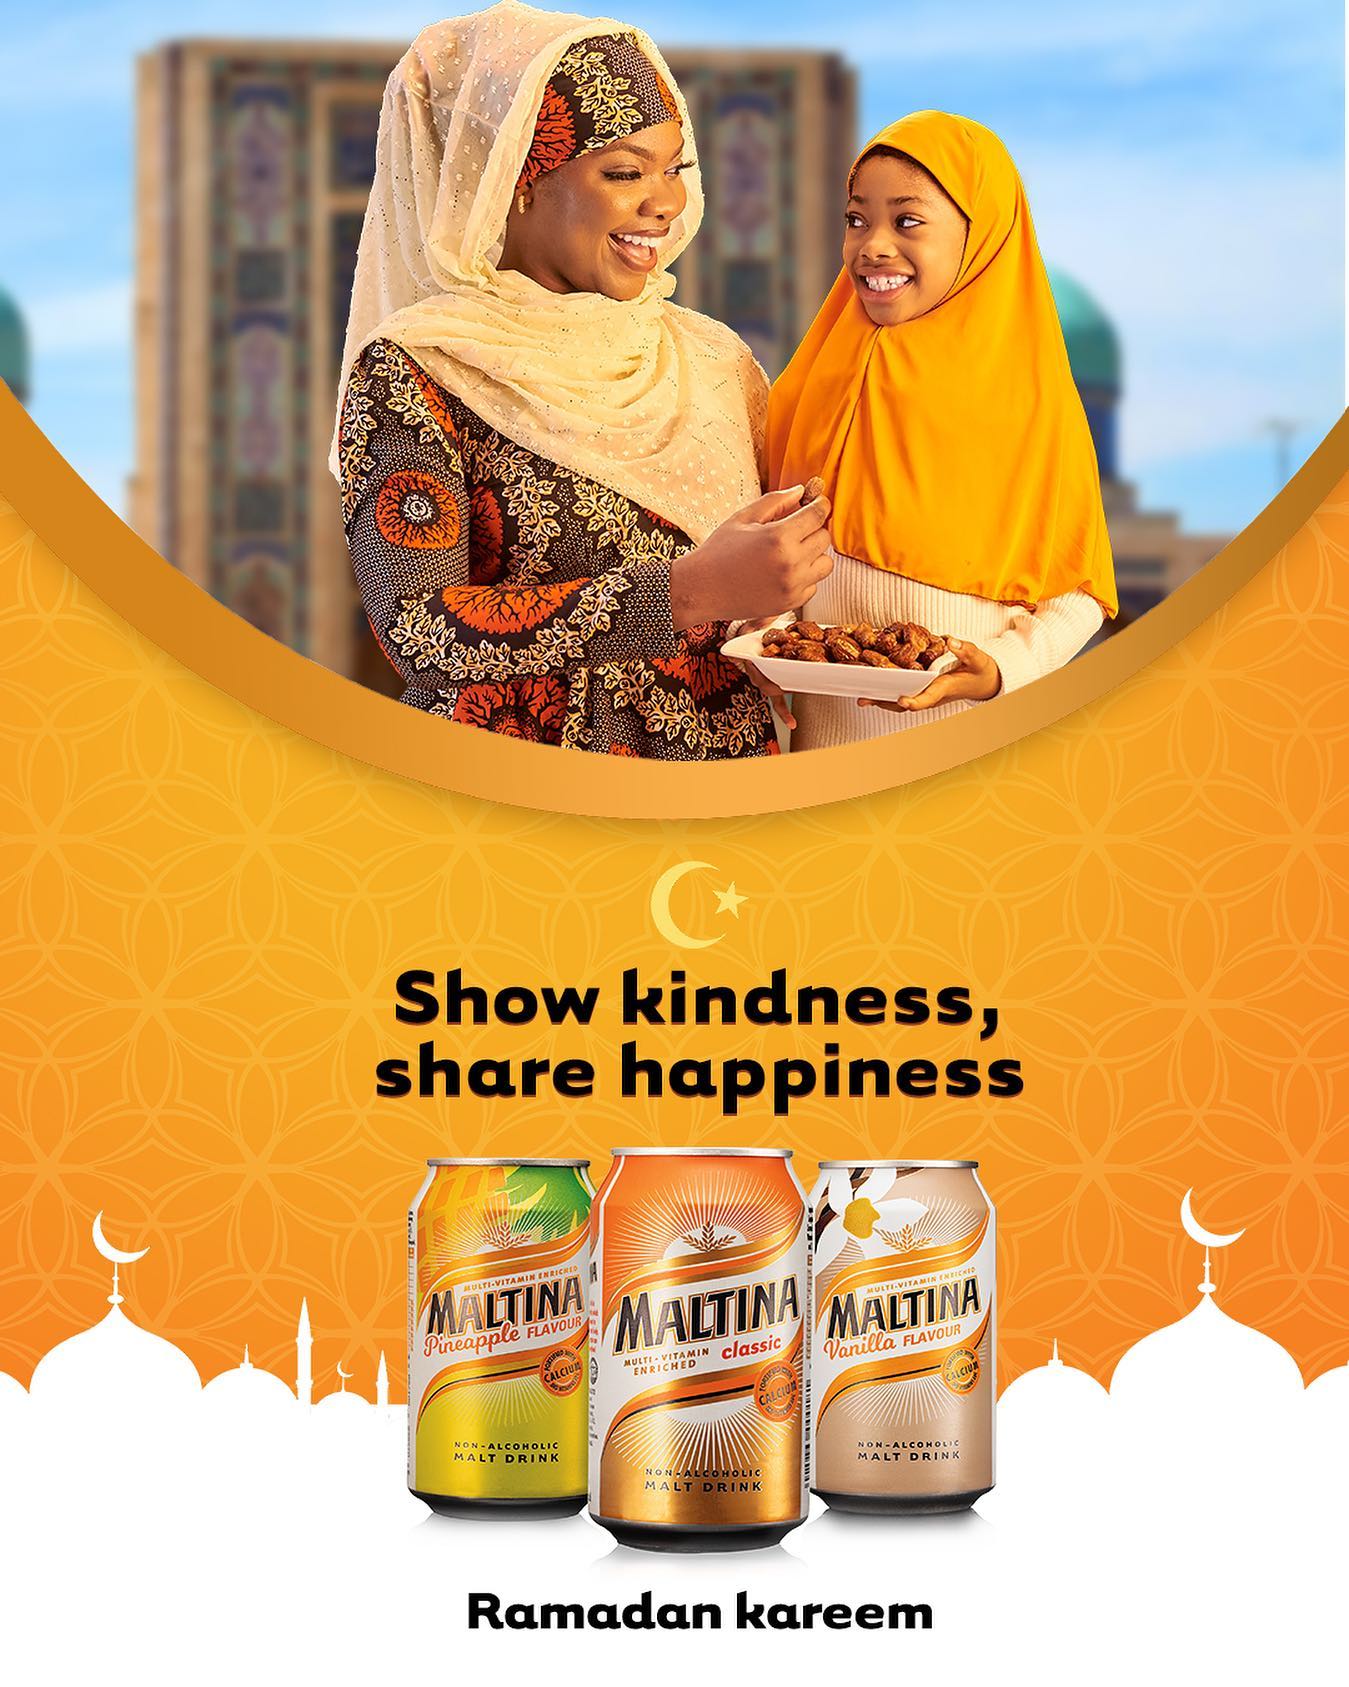 Maltina’s “Show Kindness, Share Happiness” campaign: A reminder of the true essence of Ramadan